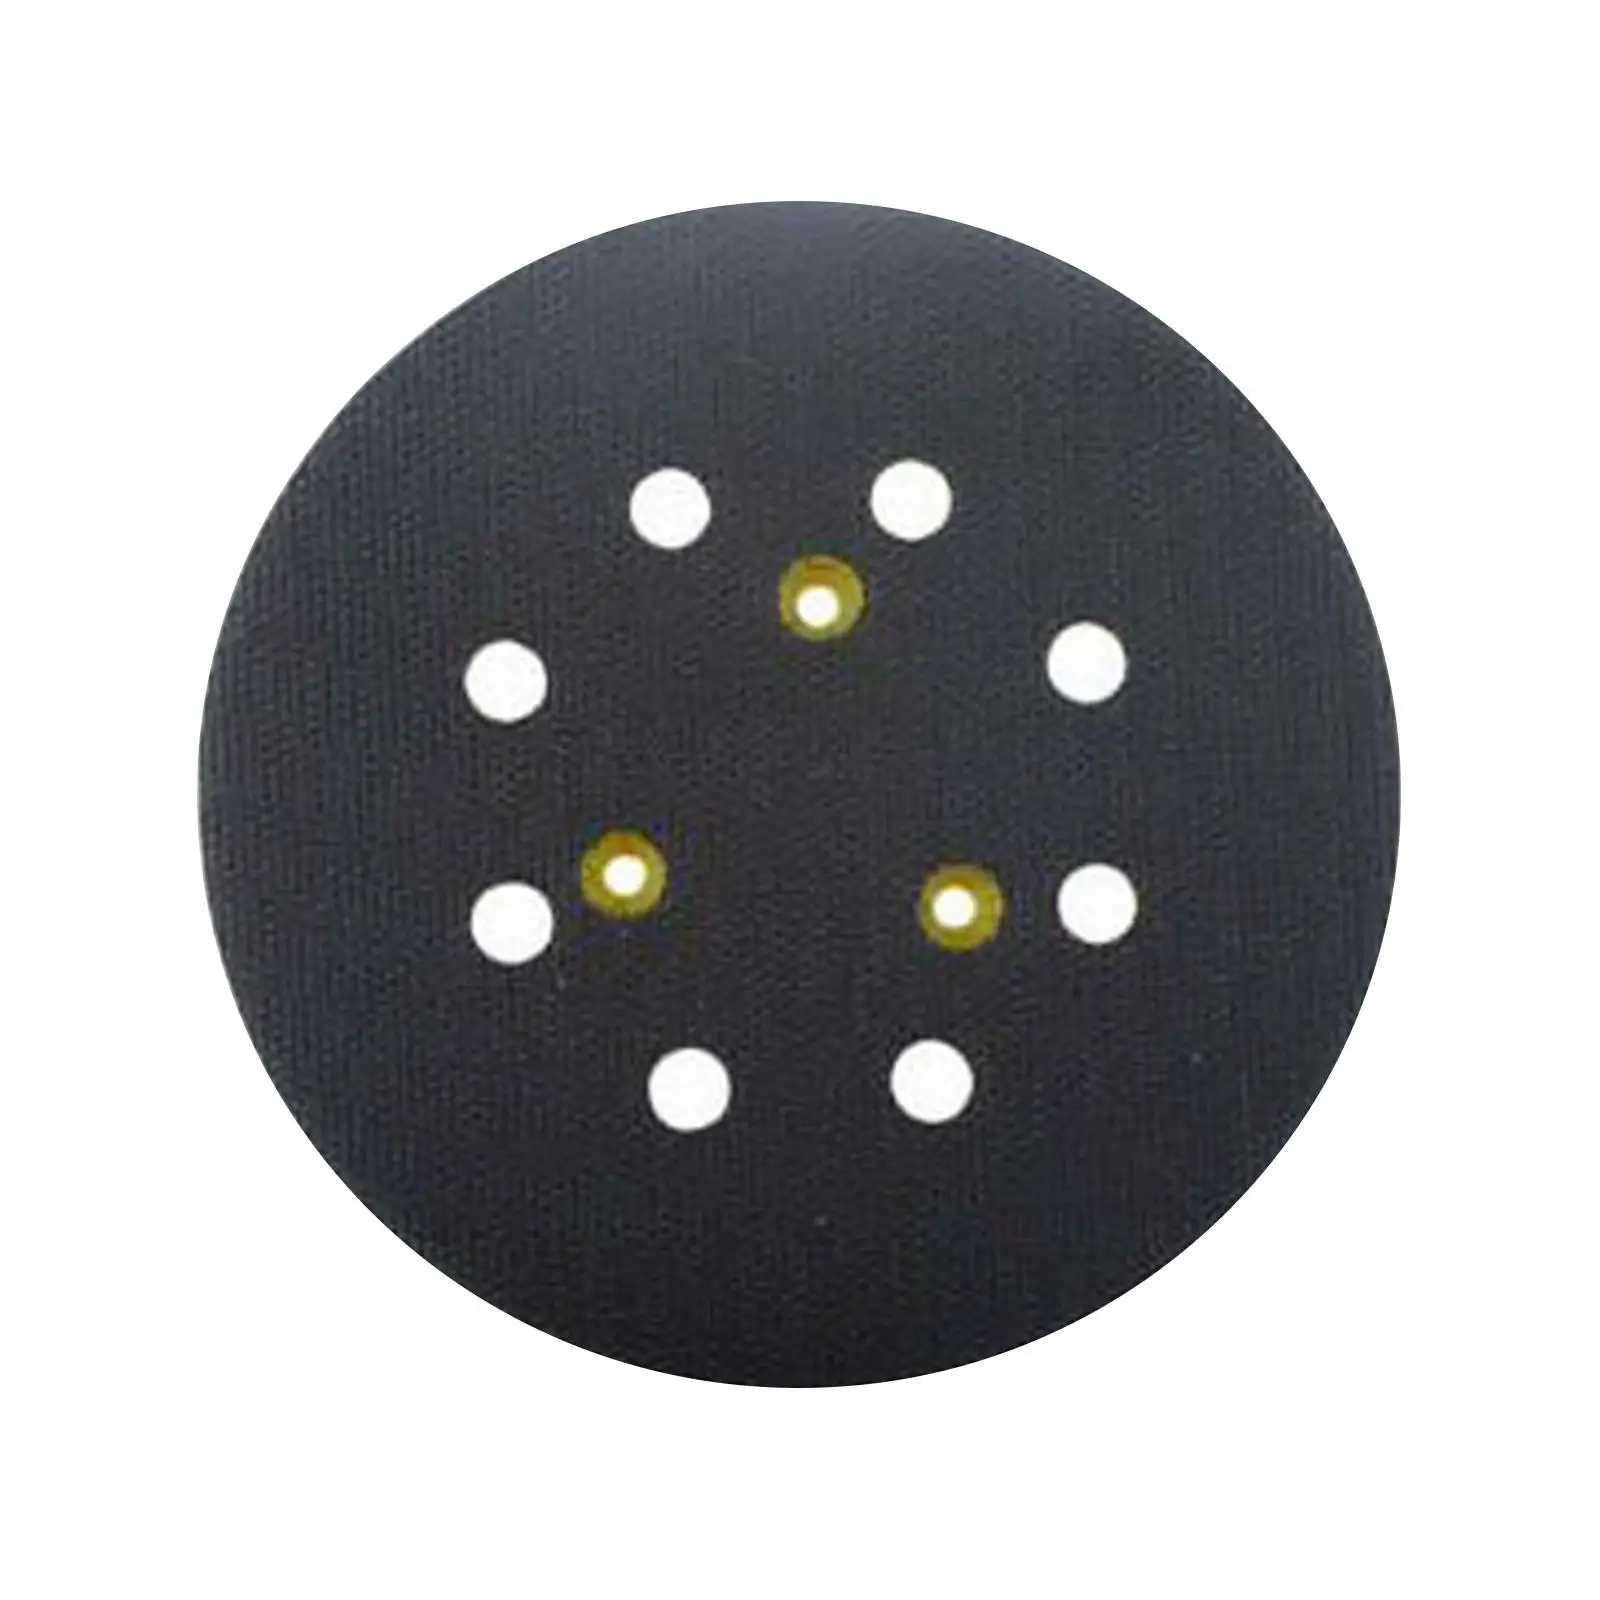 Practical Sanding Disc Pad Accs Replacement Hook Loop Backer Pads Ventilation 5 inch 125mm 8 Holes Grinding Plates for Polisher